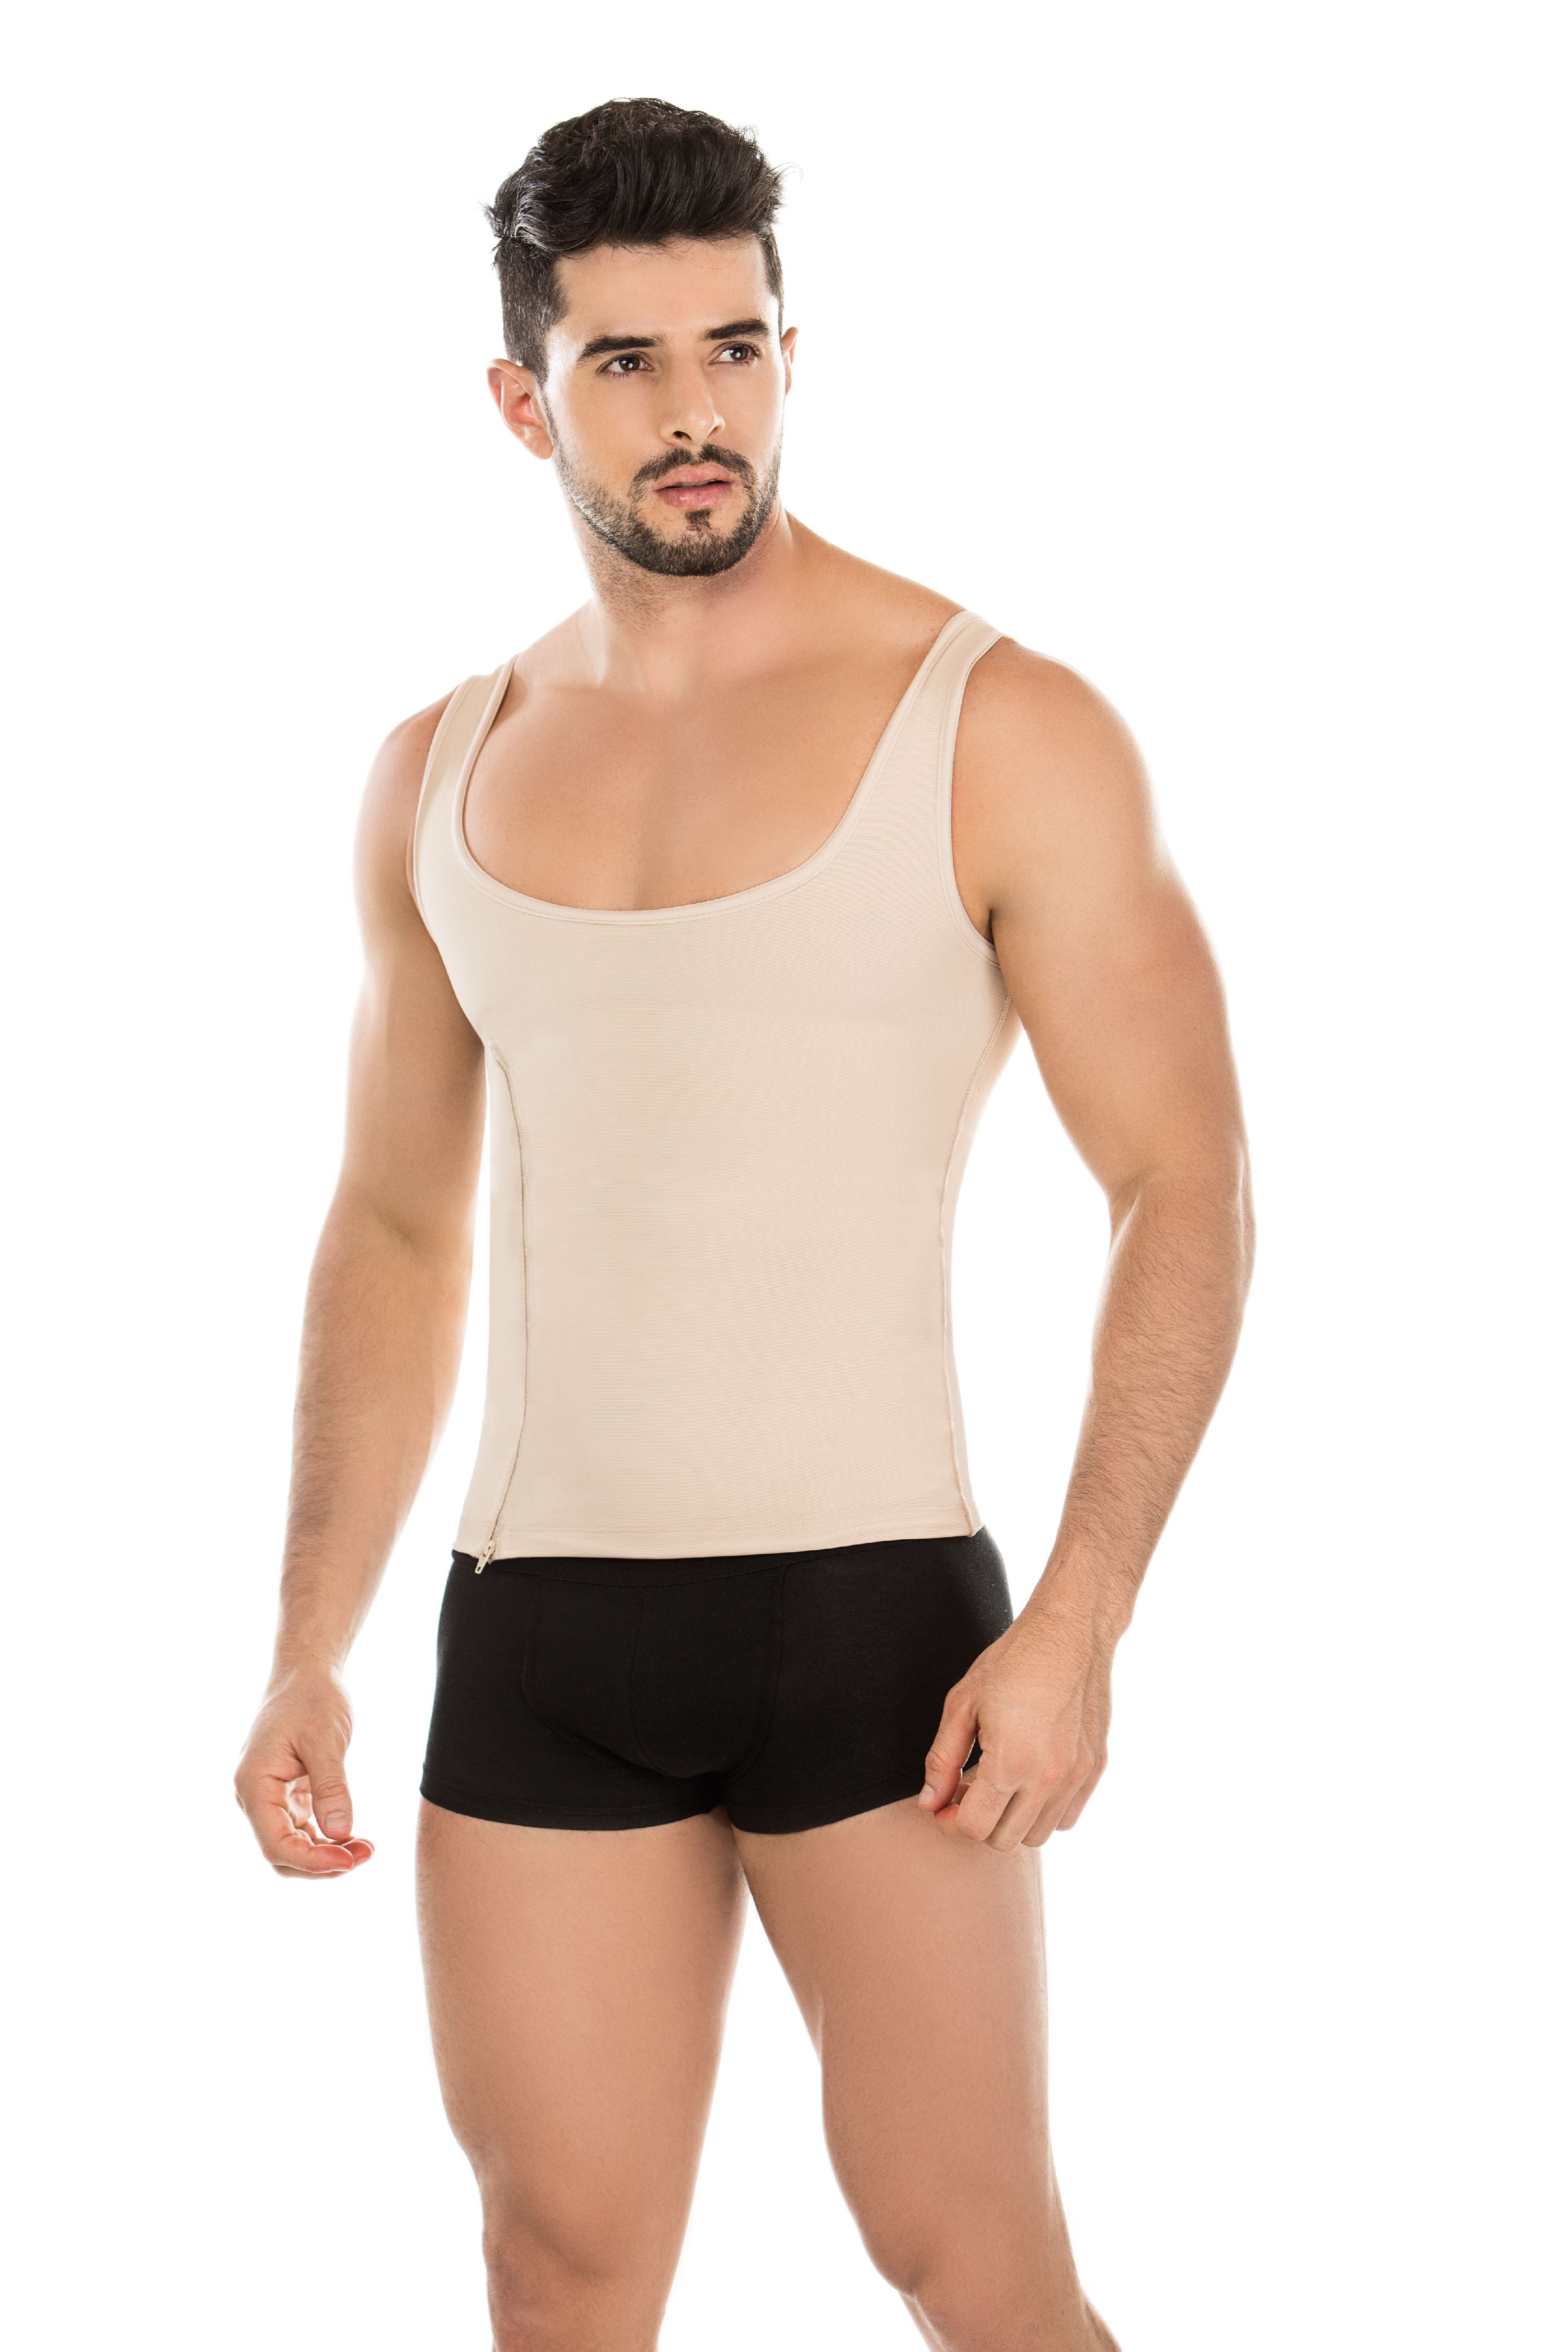 MARENA Recovery Compression Garments Chin Strap - Mid-Neck Support with  Hook & Loop Closure - Extra Large - Beige (FM100) 